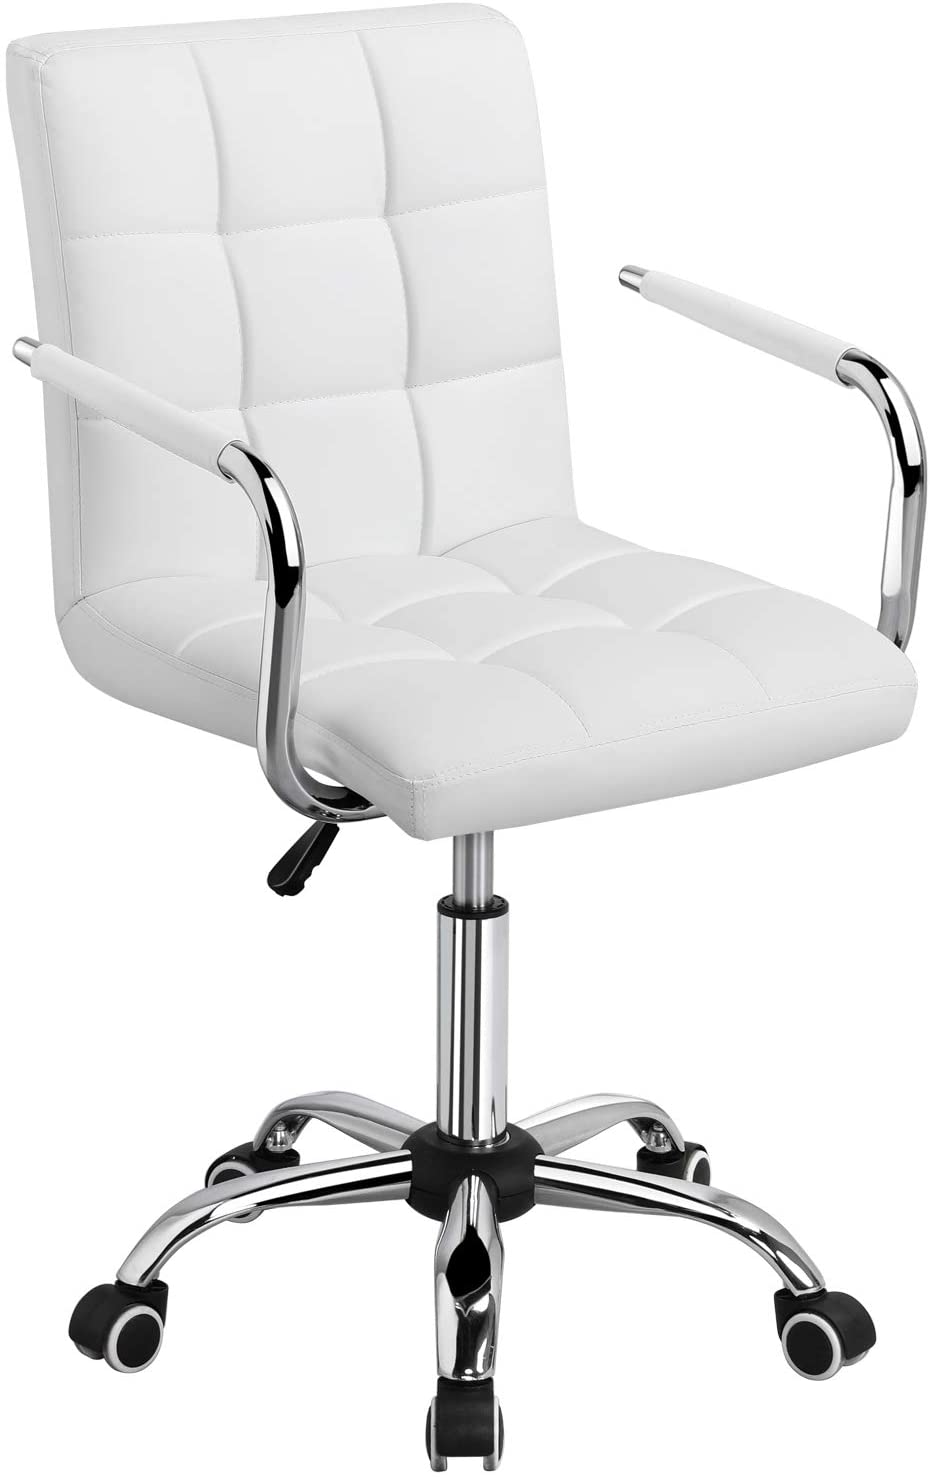 Review of Yaheetech White Desk Chairs with Wheels/Armrests